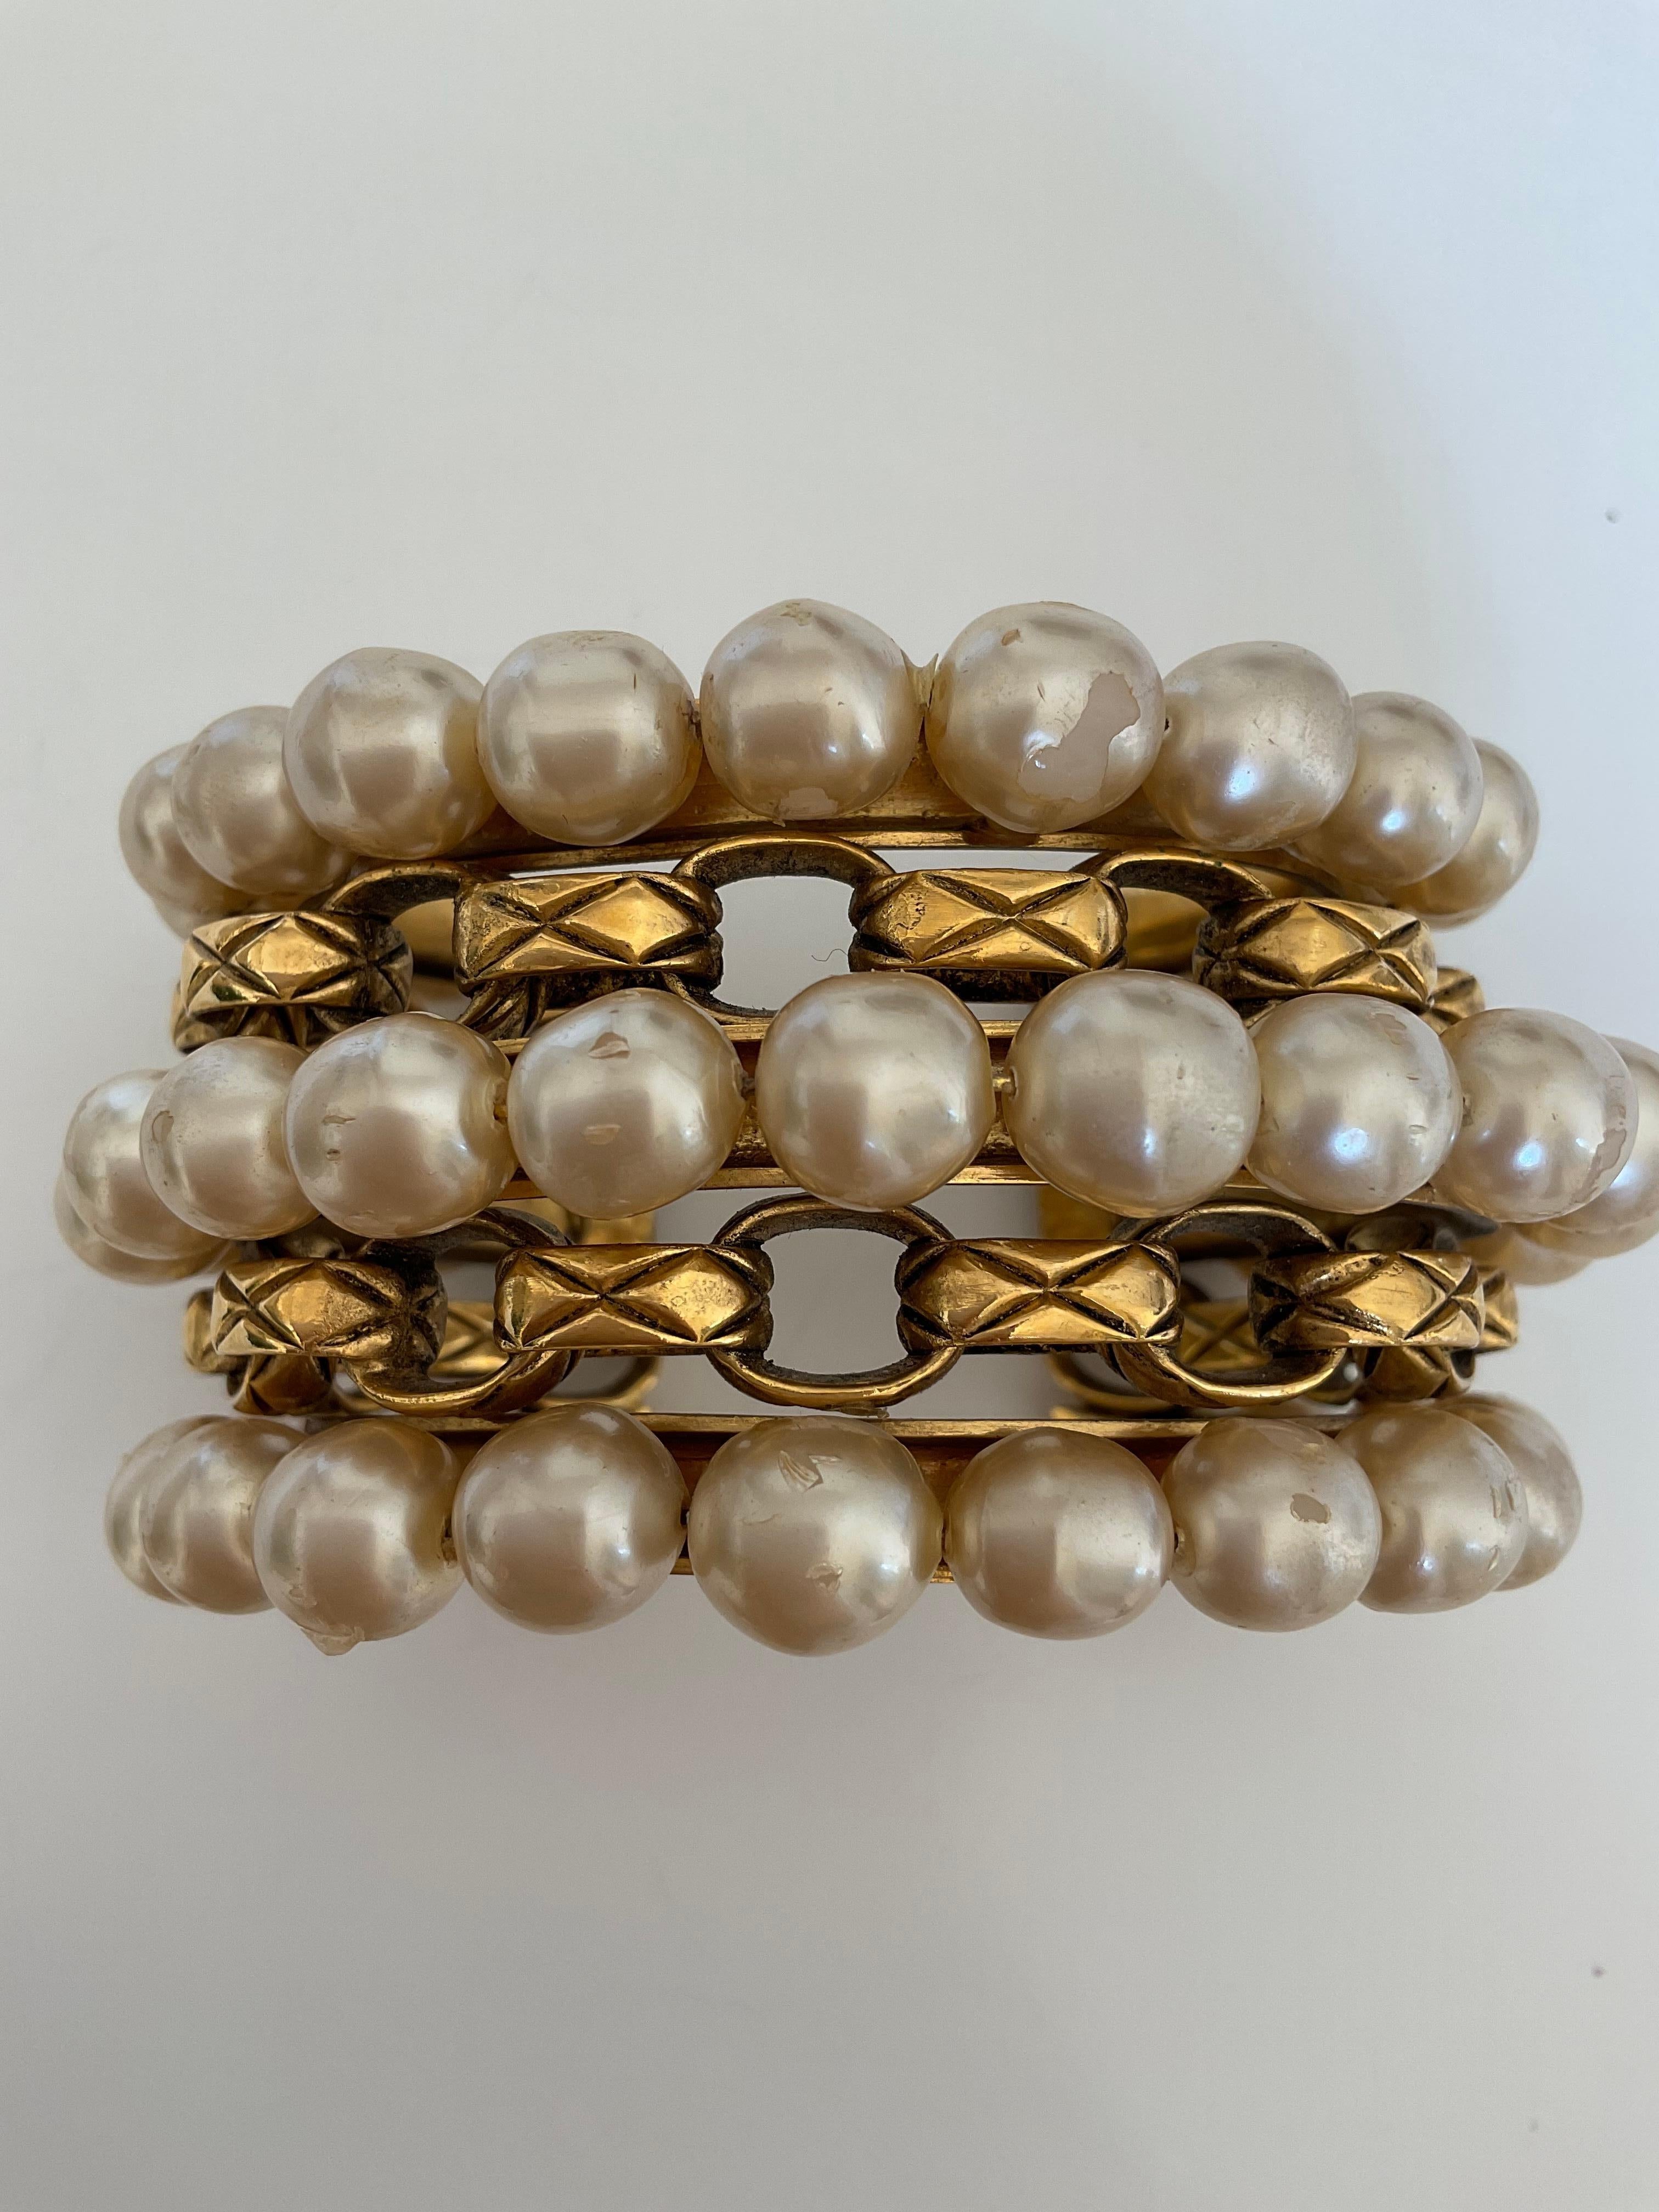 This piece from the 80’s is a Vintage CHANEL cuff made in gold plate. This rare bracelet is composed of three gold rows of faux pearls in resin and two rows of the iconic quilted chain known of the House. The Haute couture cuff is stamped “Chanel 2